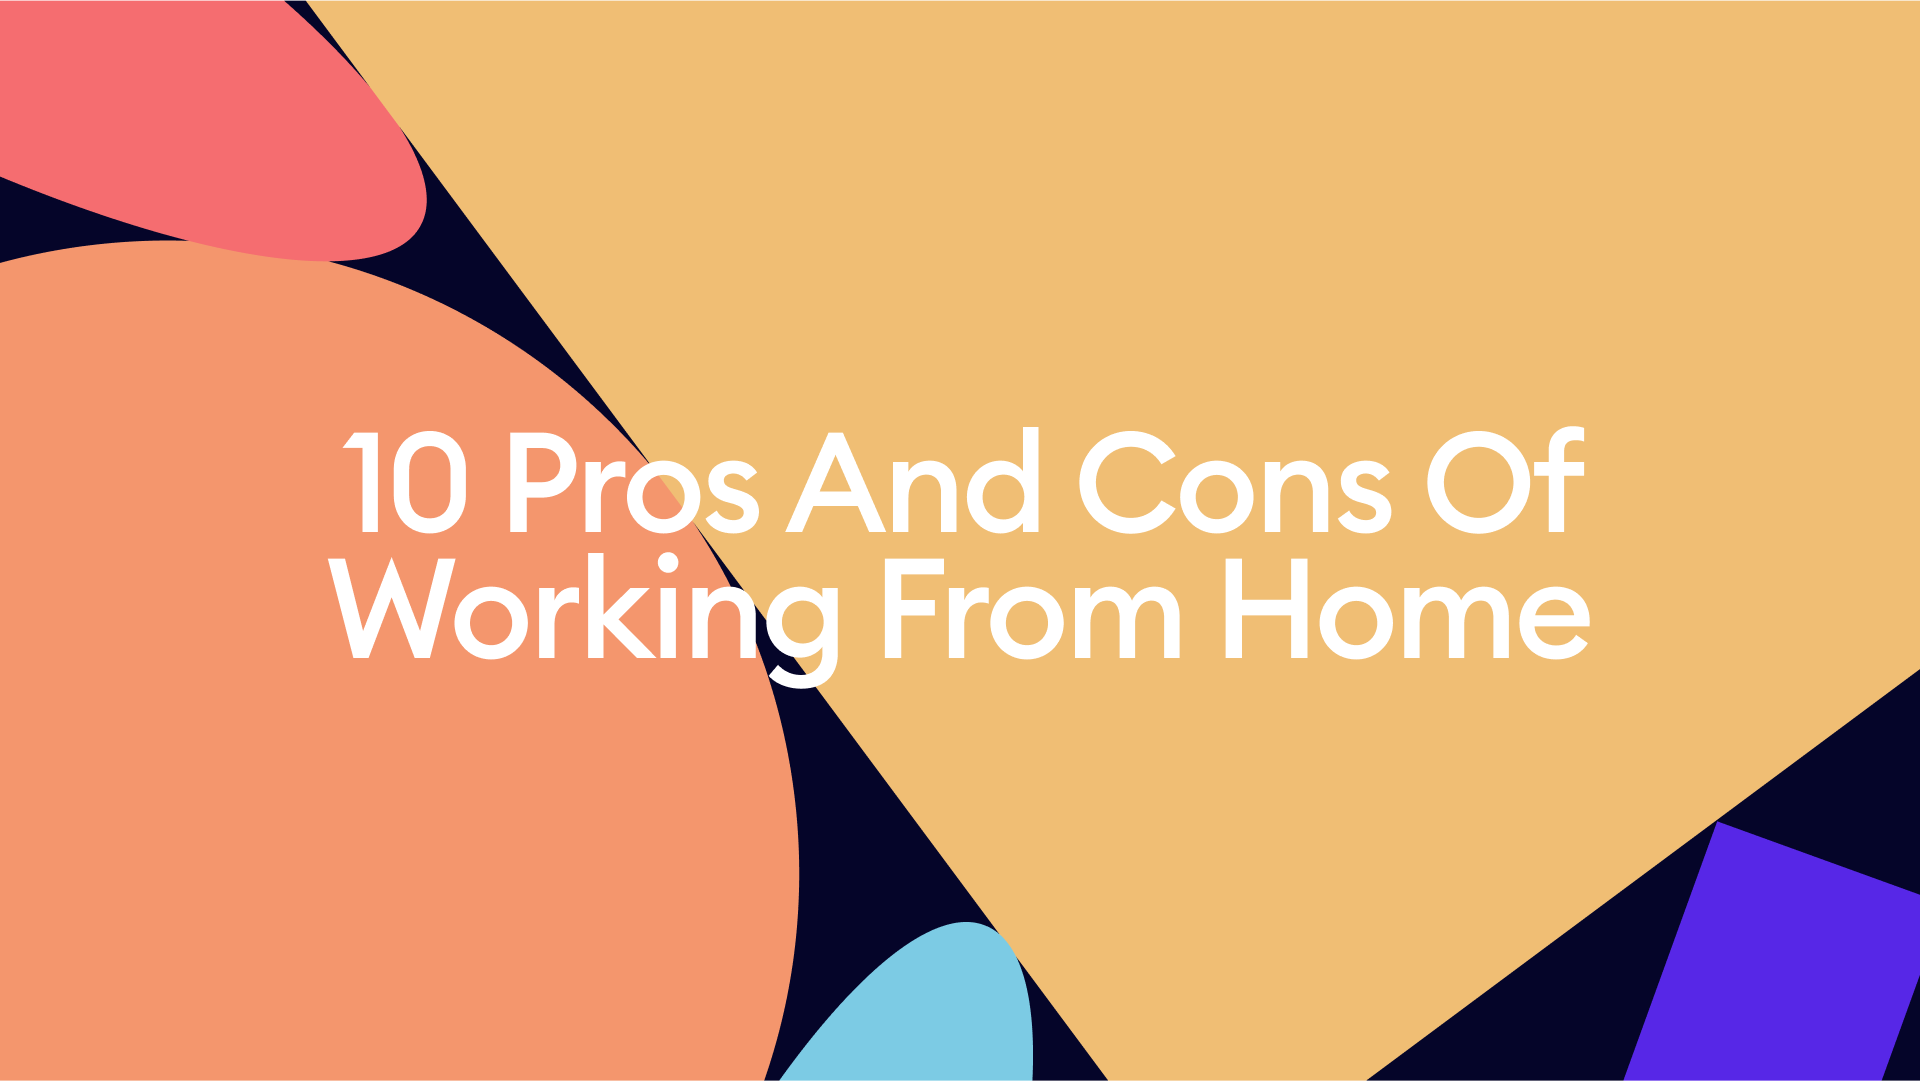 10 pros and cons of working from home in 2022 and beyond